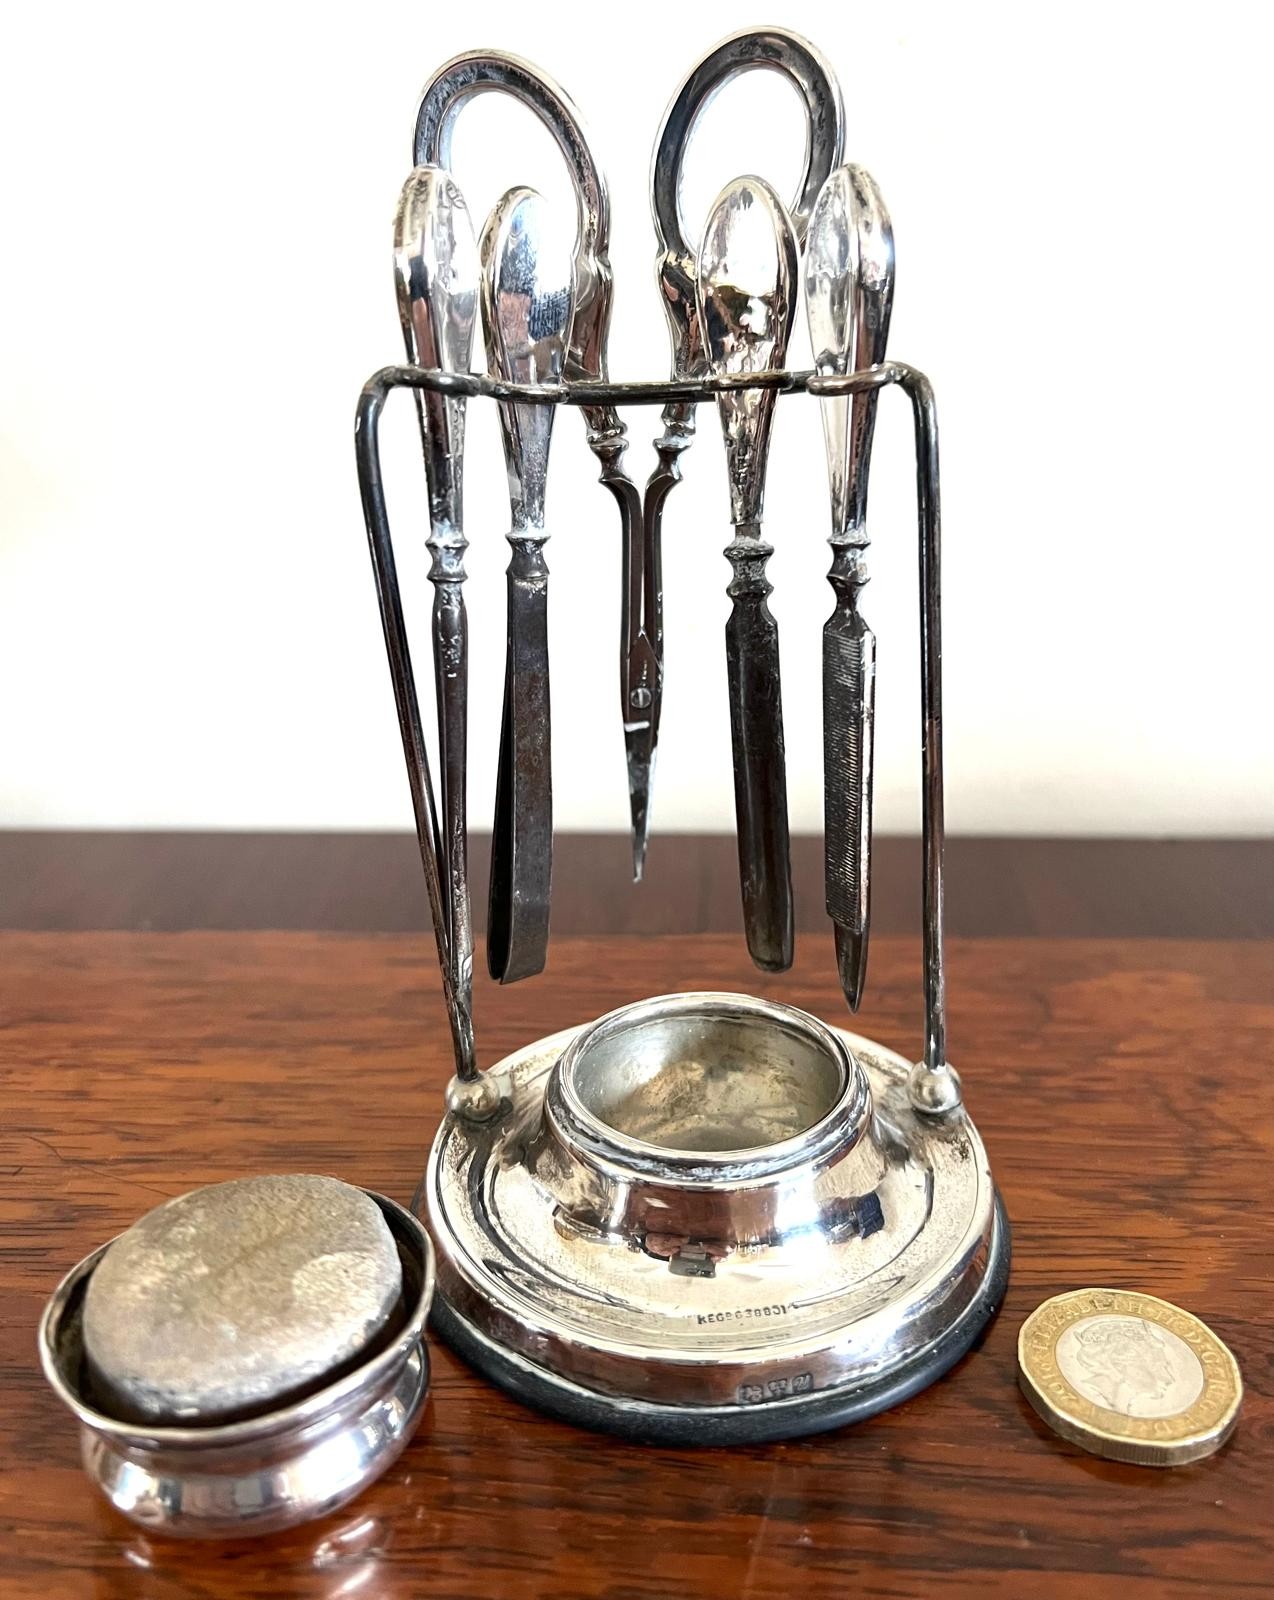 SILVER MANICURE SET, CHESTER HALLMARK, 1920, SIX PIECE UPON CIRCULAR STAND - Image 2 of 4